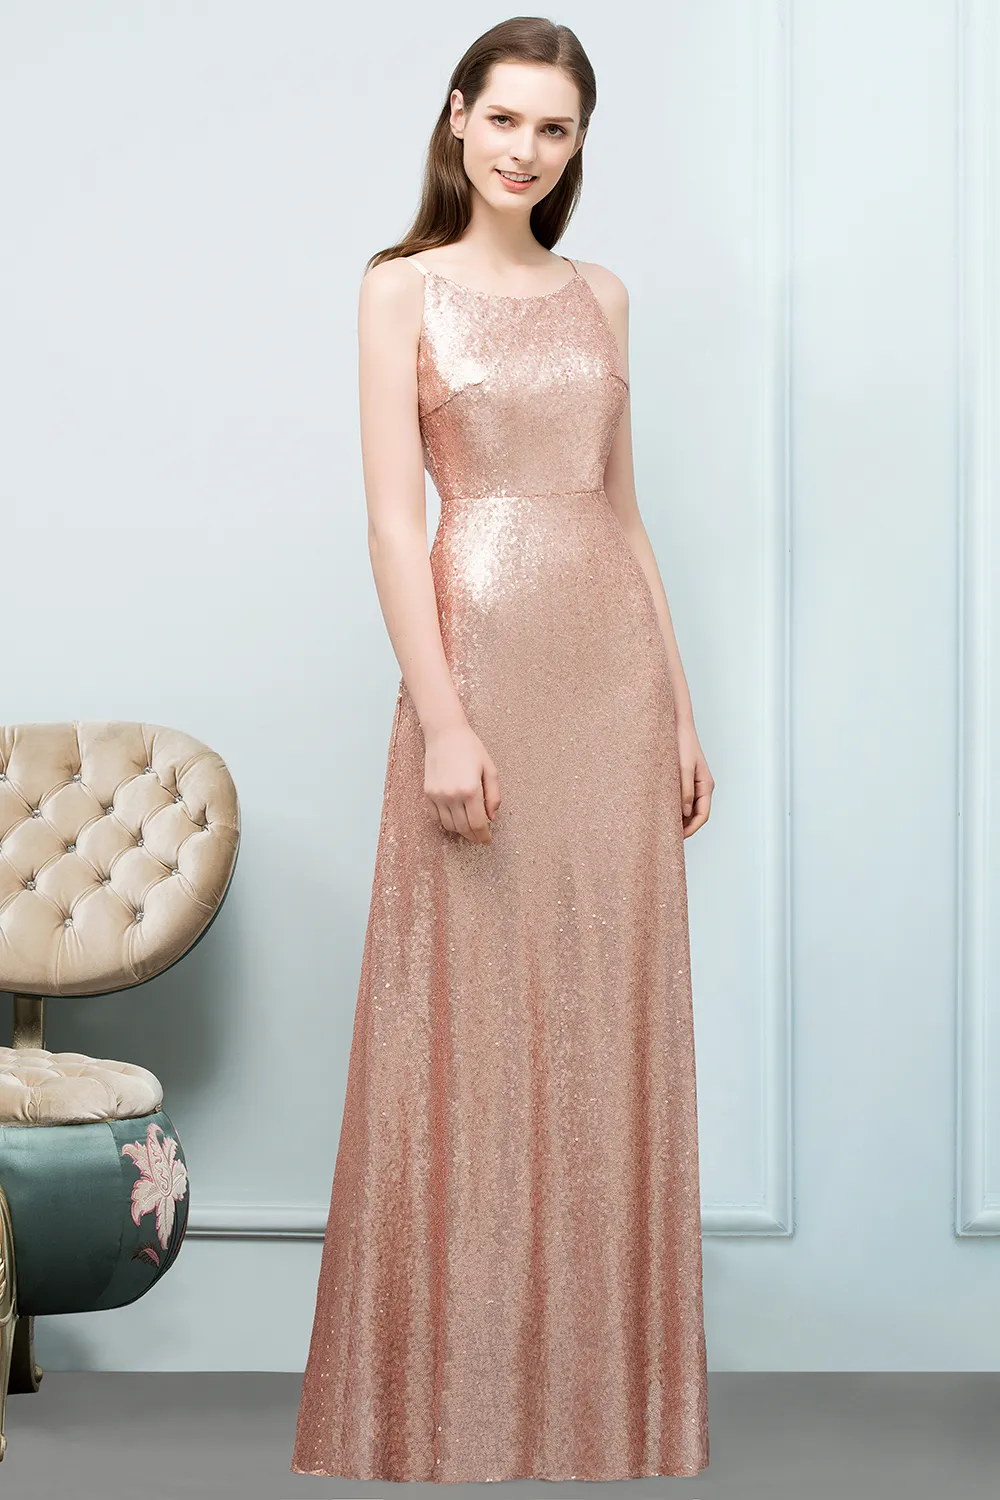 Real Image Rose Gold Sequins Long Bridesmaid Dresses Crew Neck Wedding Guest Party Maid Of Honor Evening Dresses CPS789